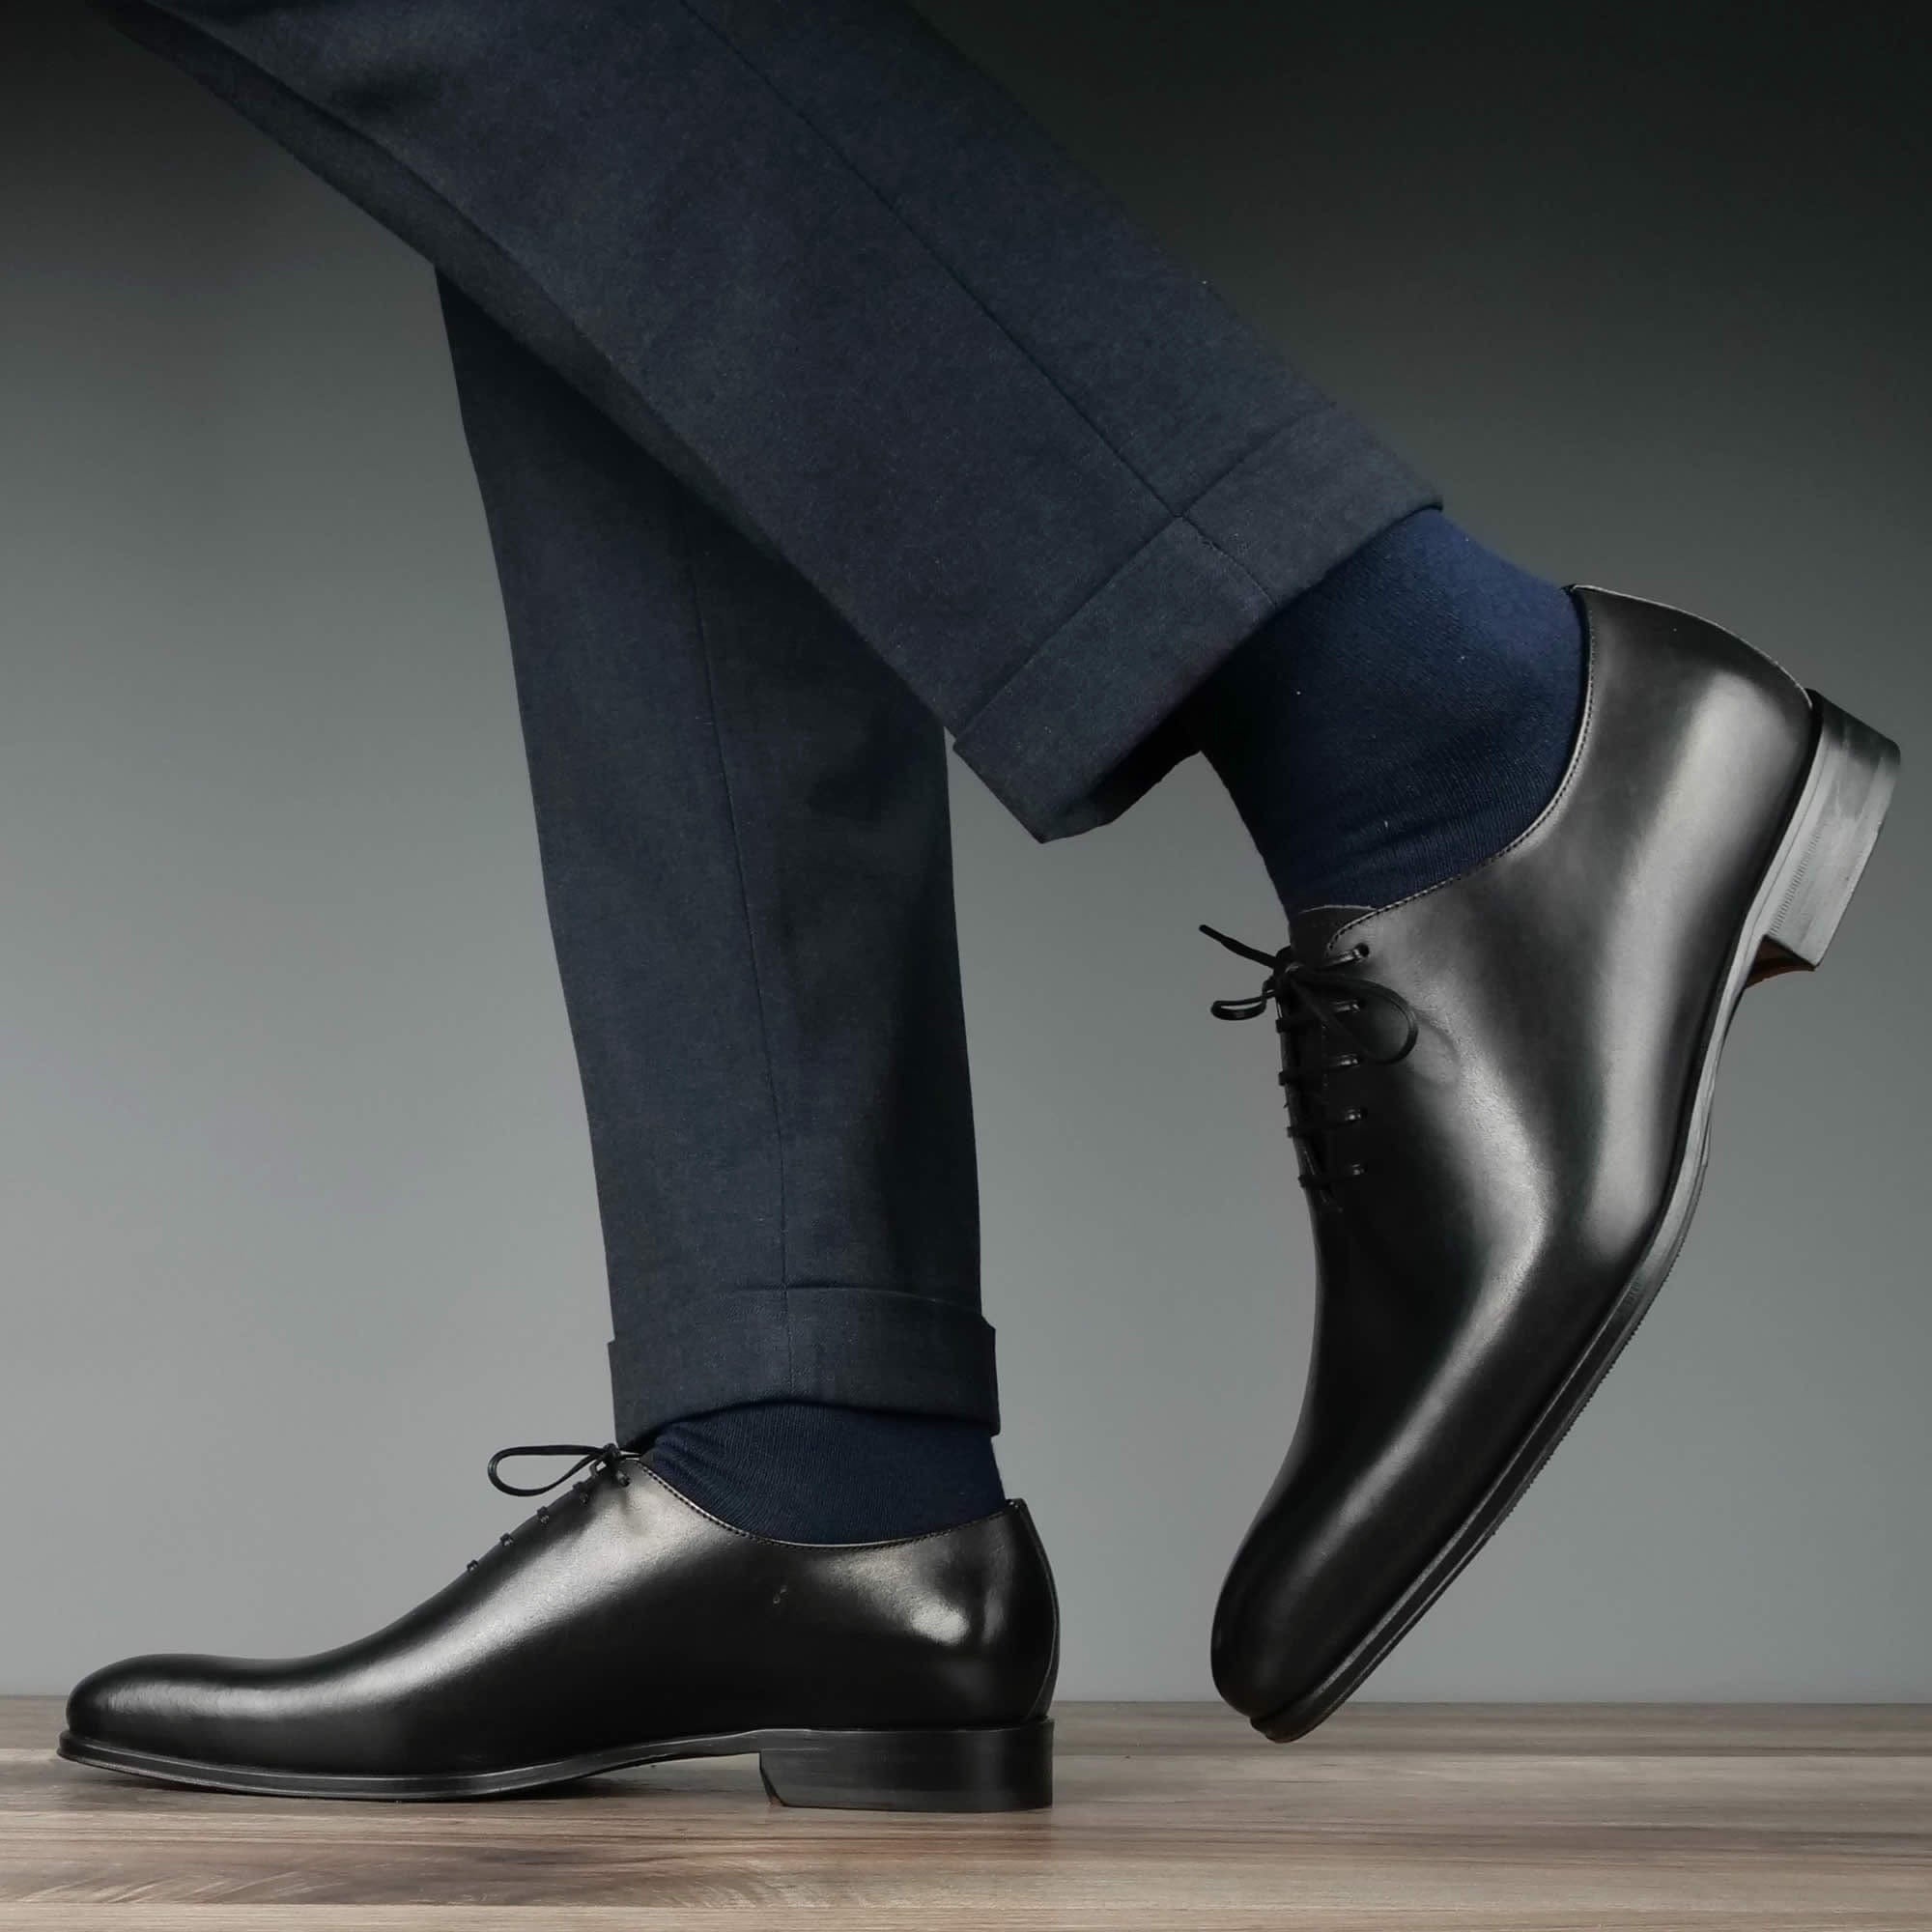 Before The Throne Wholecut | Men Dress Shoes I Que Shebley 6.5 Us/39.5 EU / EE-standard Width +9mm